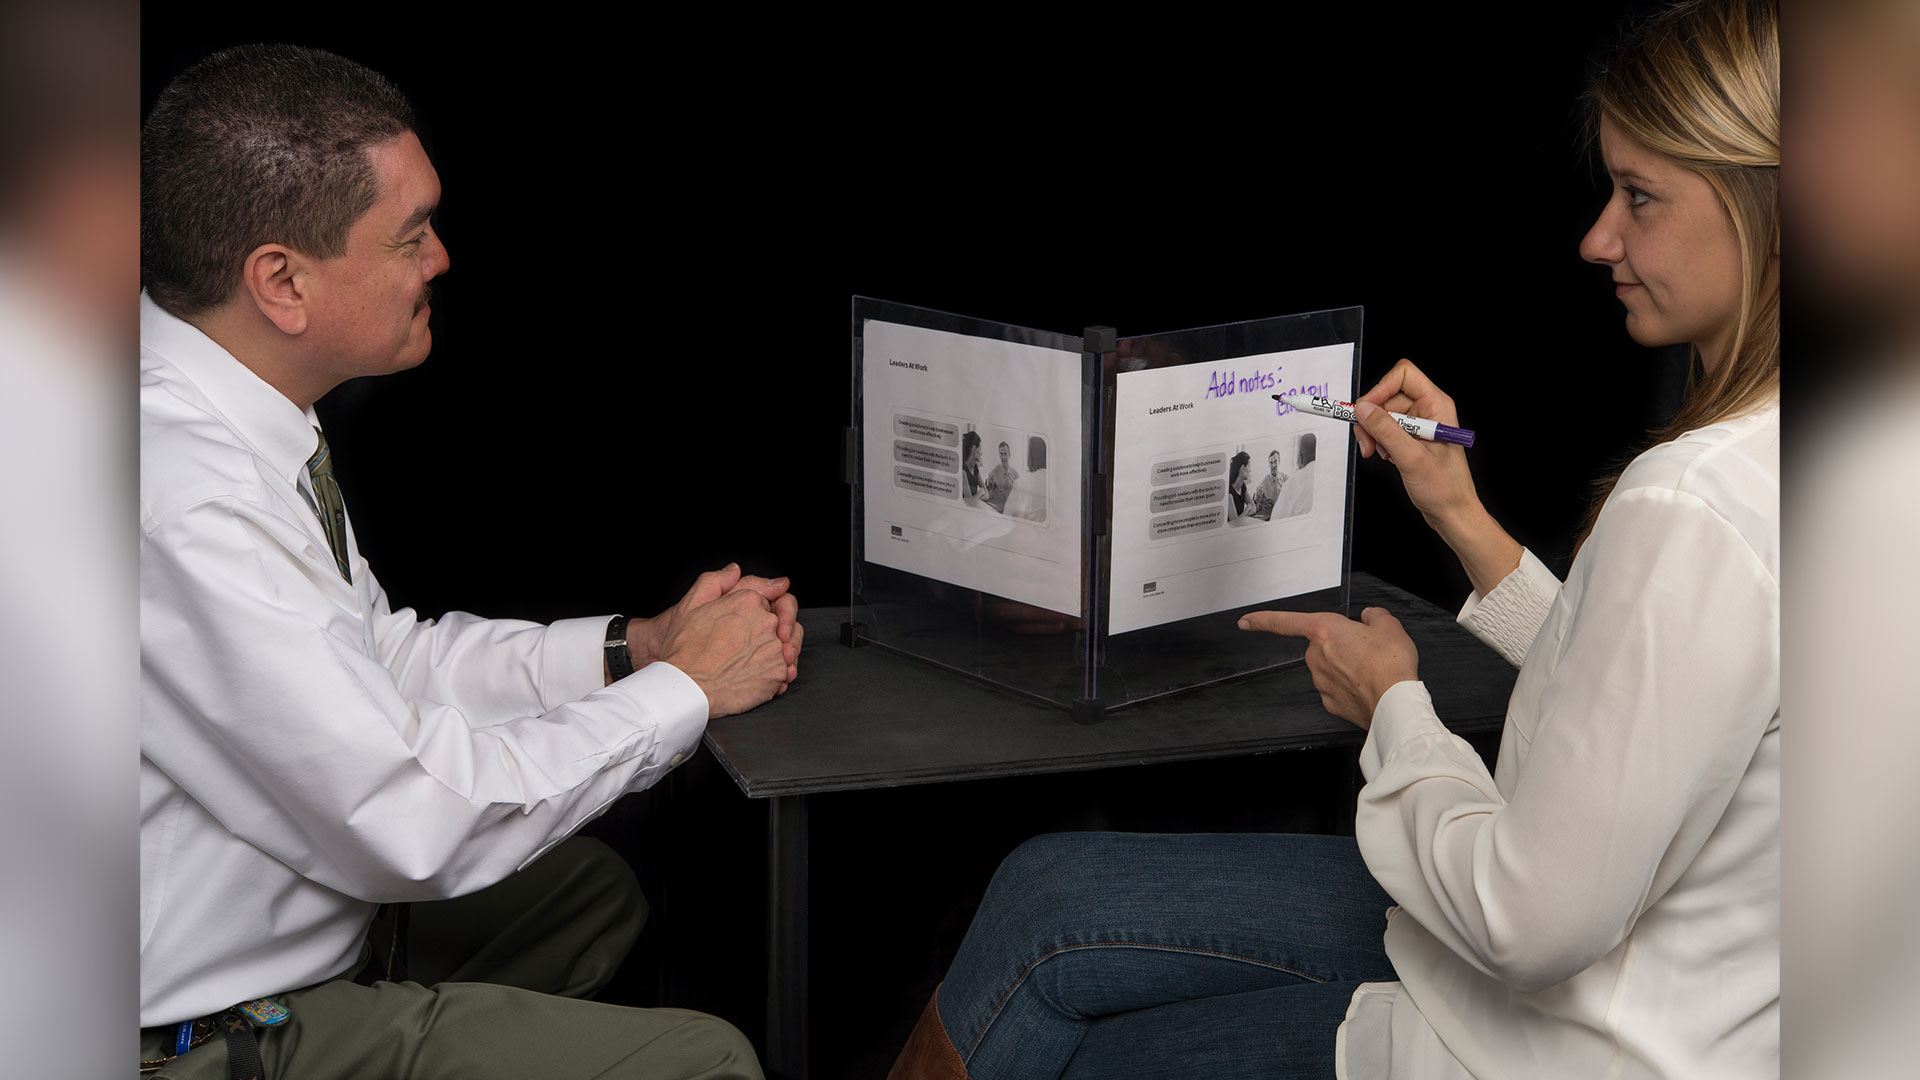 Two people seated at table looking at presentation cube, one with dry erase marker taking notes on top of presentation cube sheets